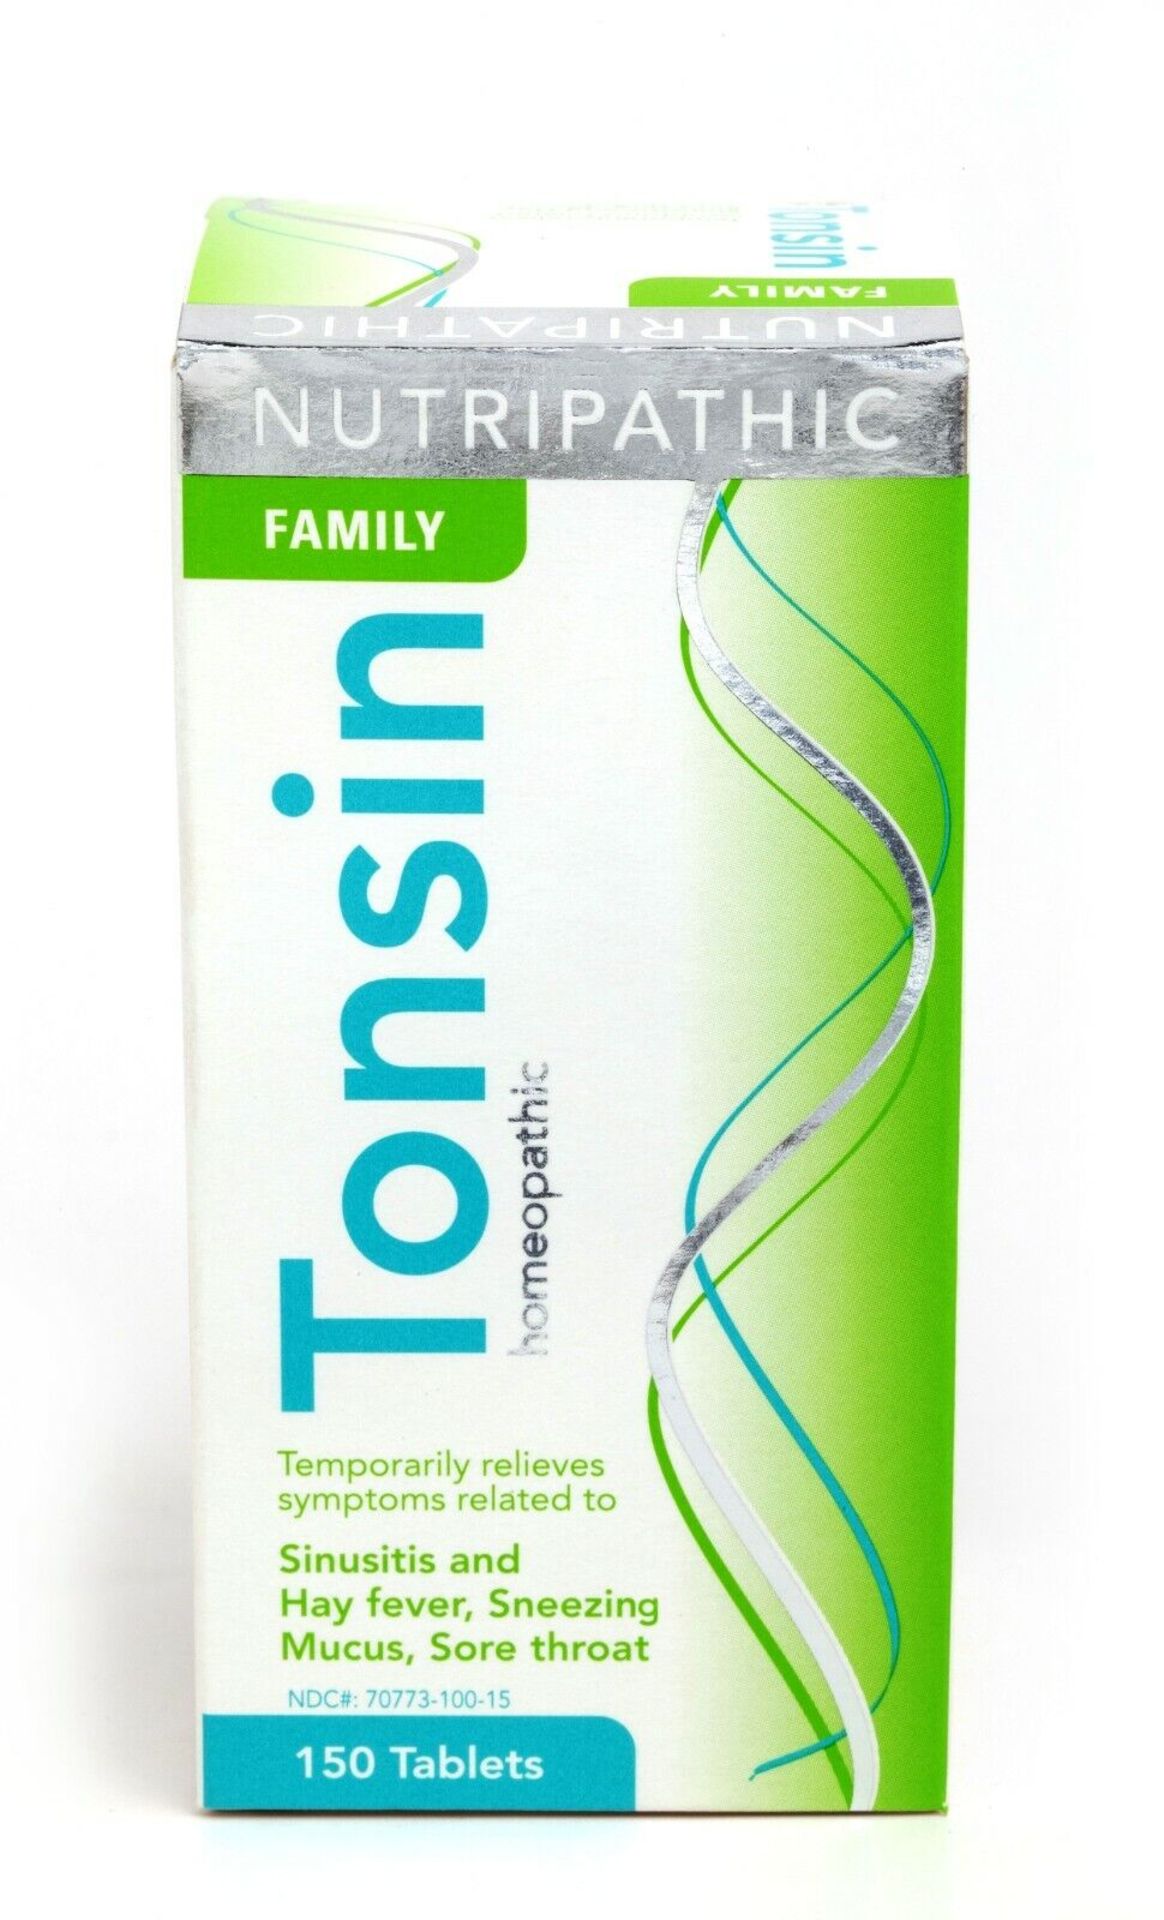 1139 X PACKS OF NUTRIPATHIC TONSIN TABLETS